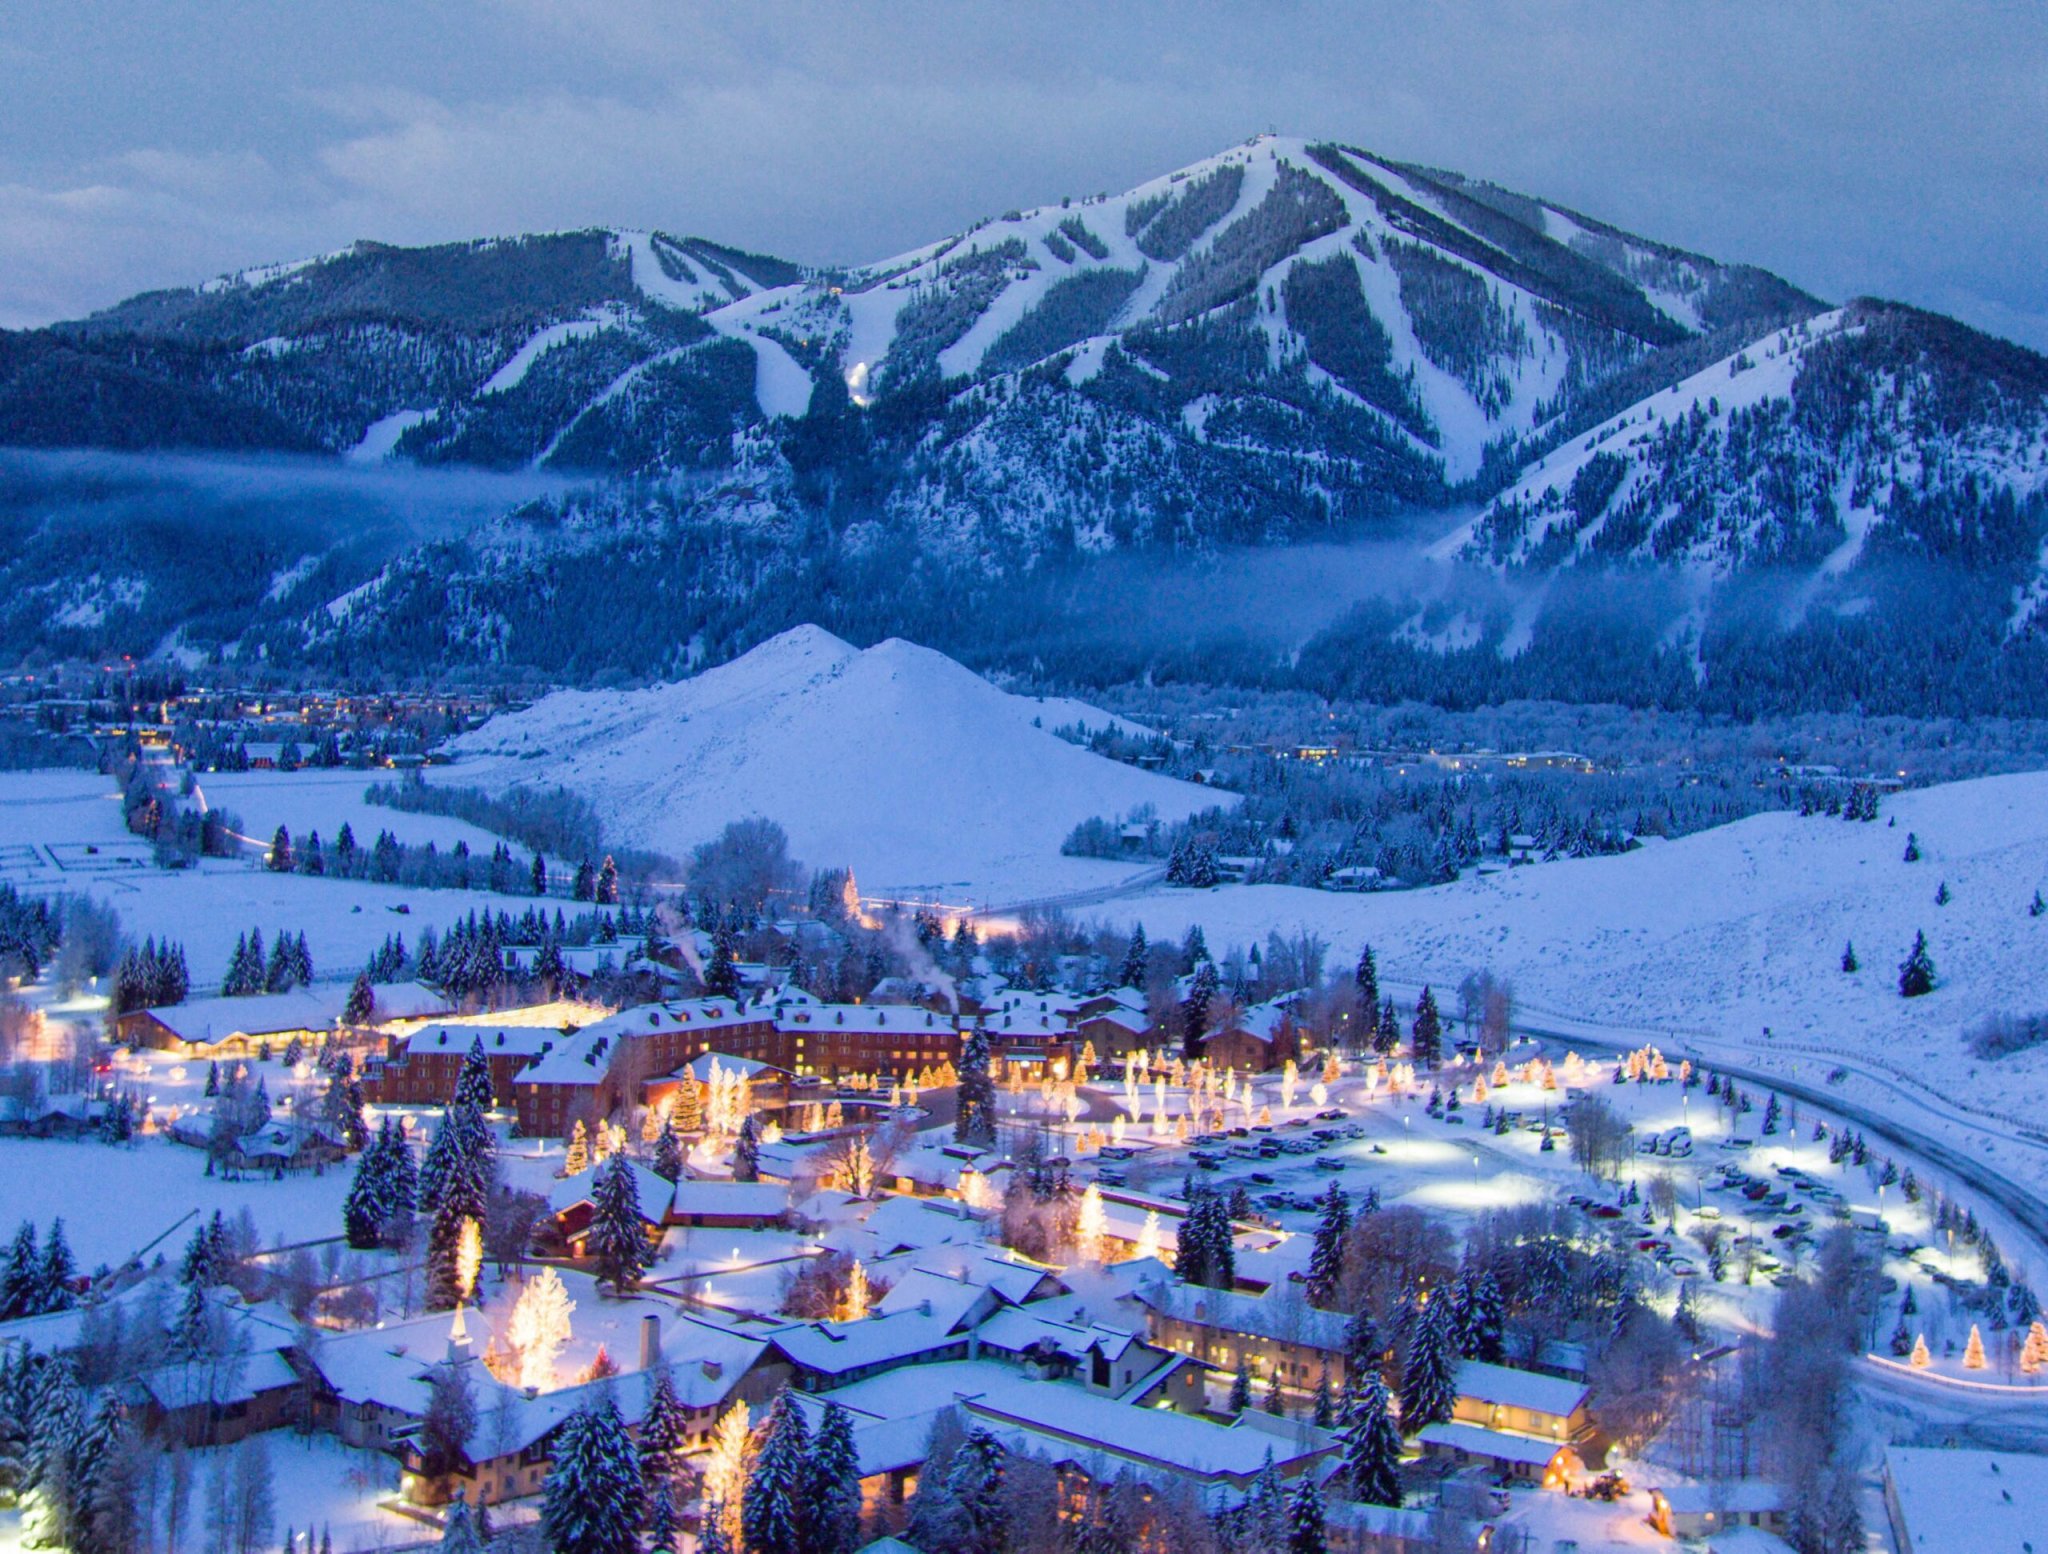 The 11 Best Uncrowded Ski Resorts In The U.S.